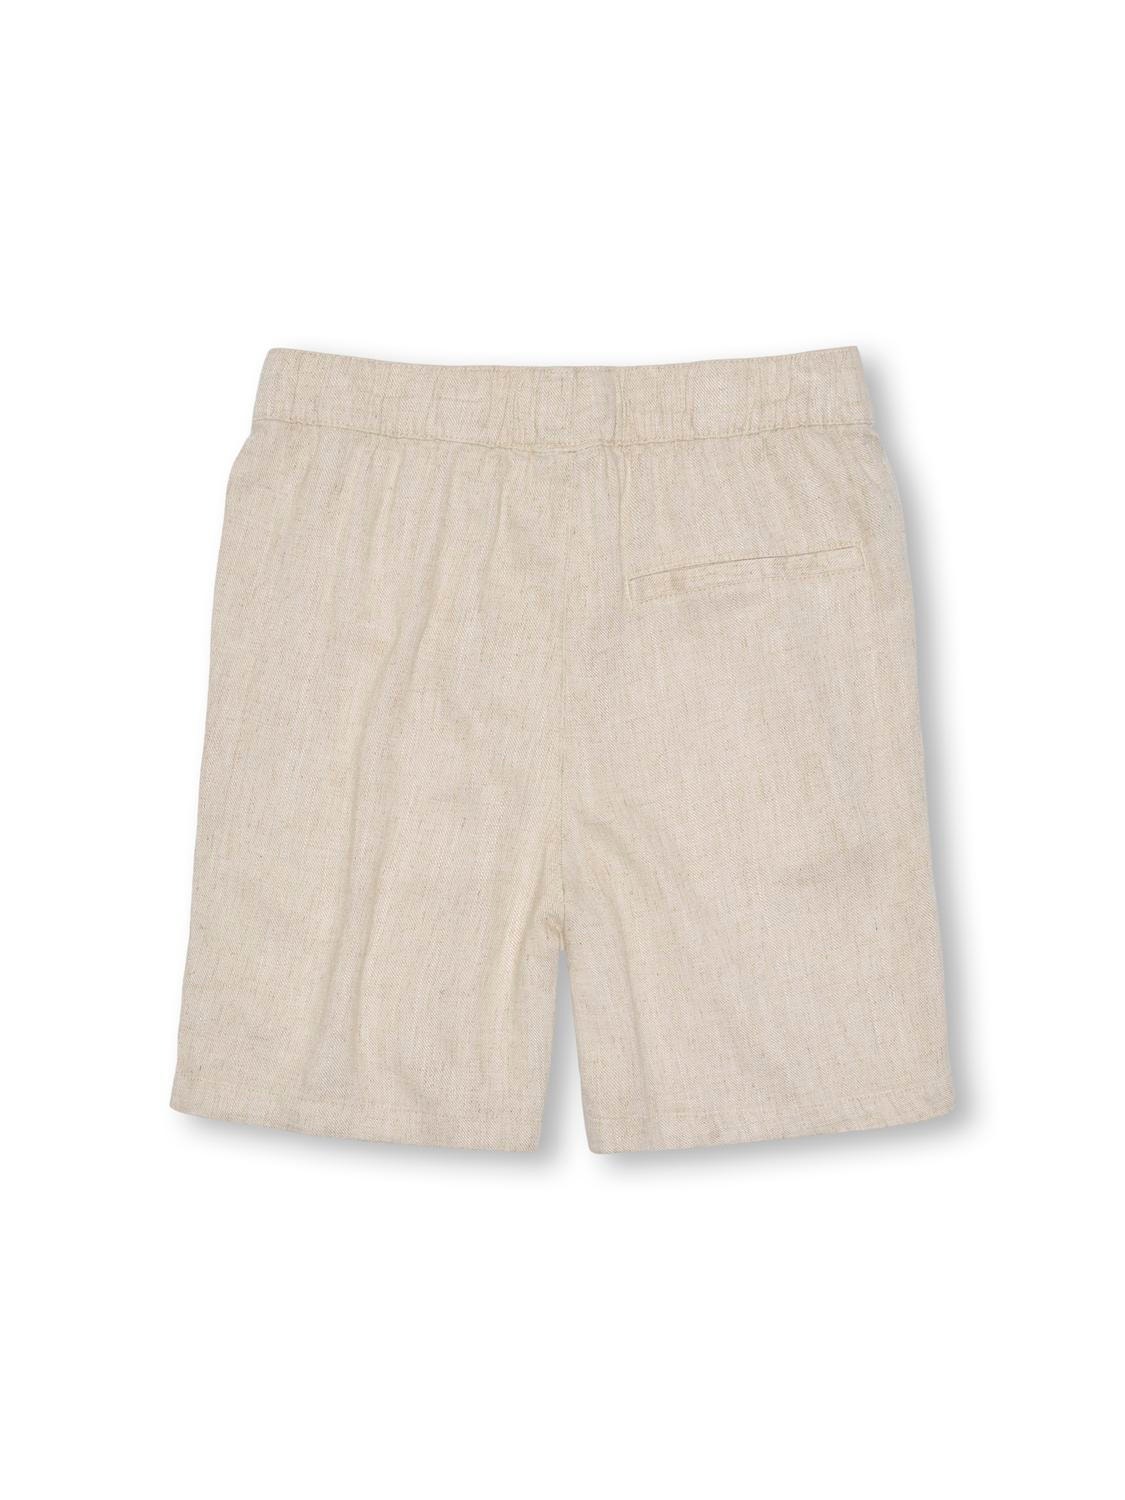 ONLY Shorts Regular Fit -Oatmeal - 15327738